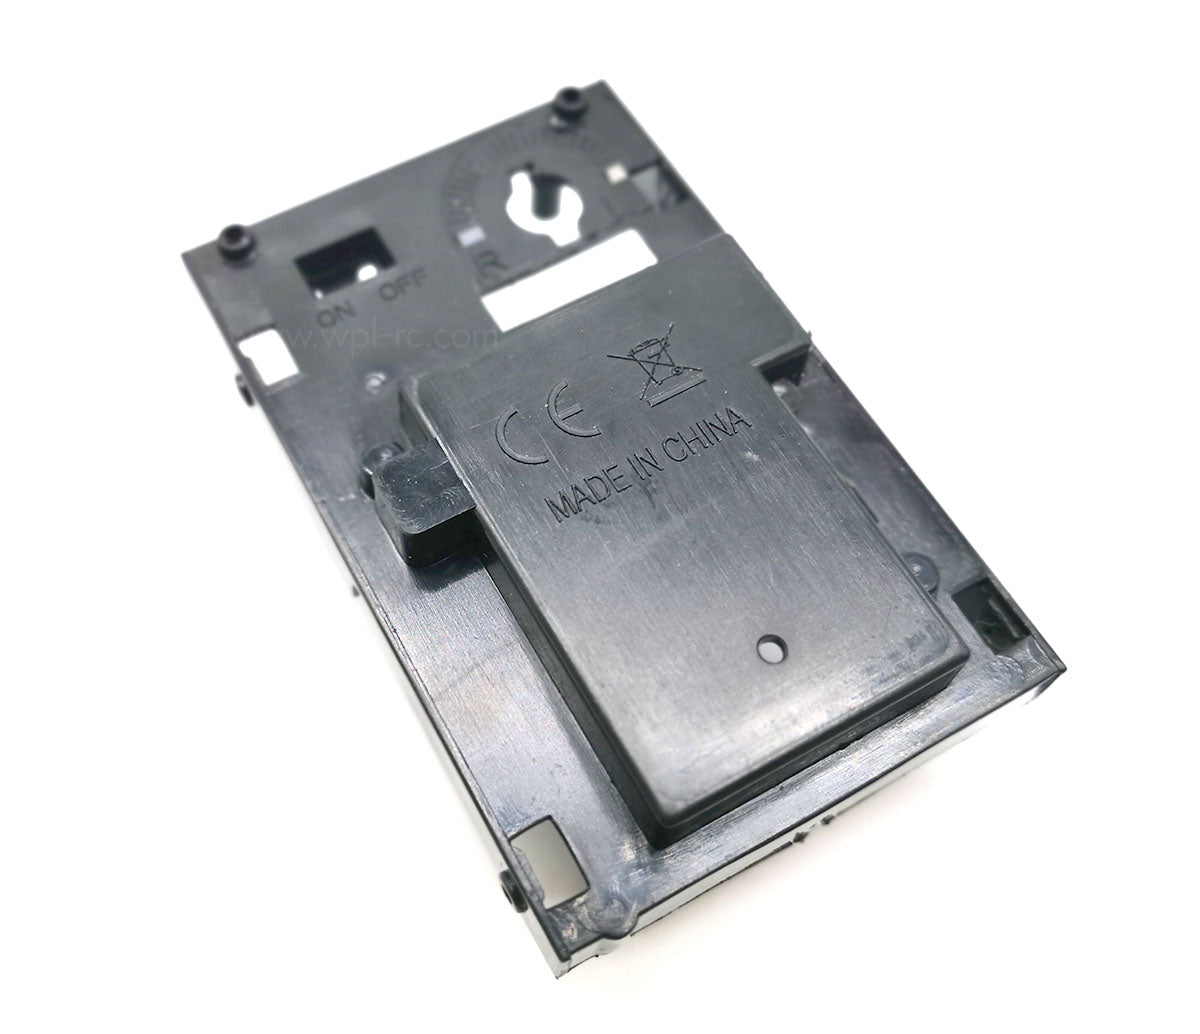 C14 C24 & All B Series Servo Mount Tray - WPL RC Official Store